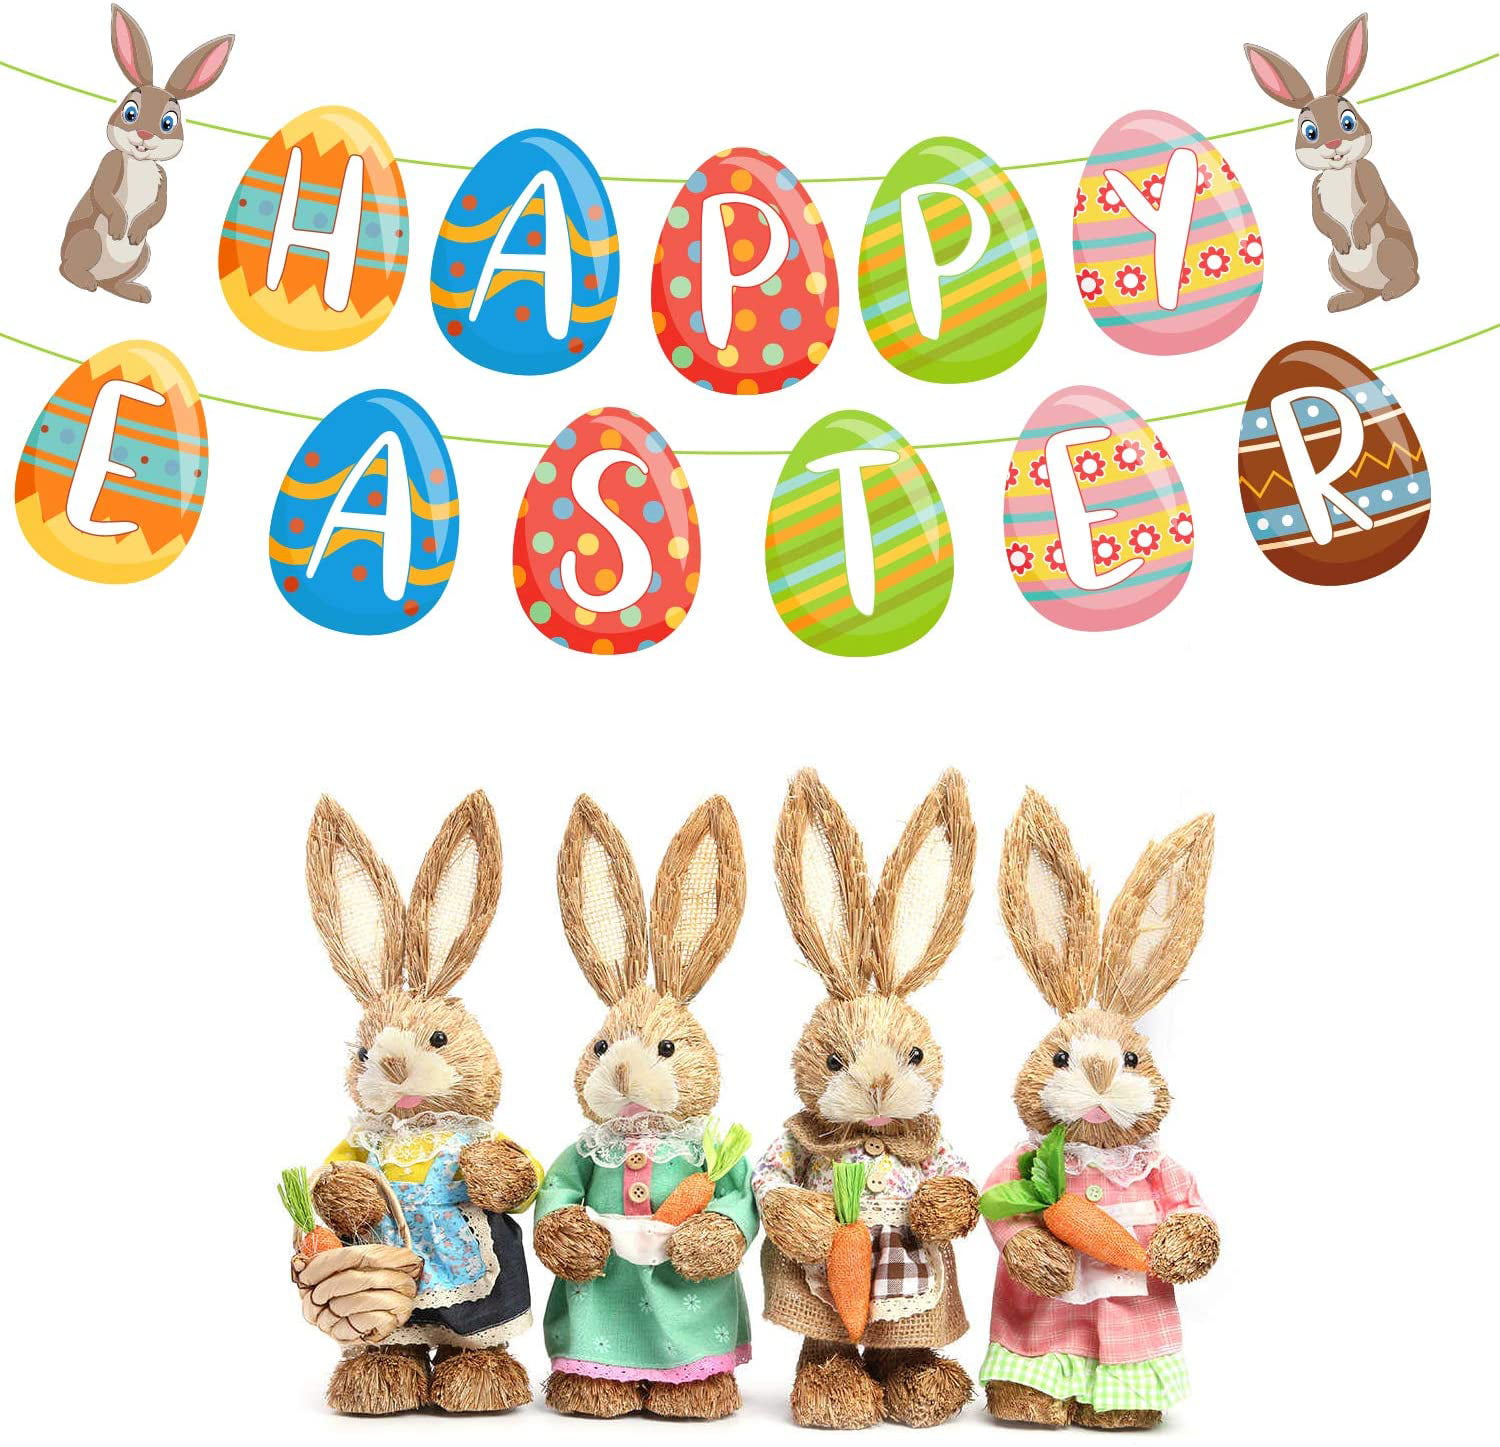 Happy Easter Banners Easter Bunny Rabbit Paper Bunting Hanging Garland for Easter Party Decorations Home Easter Decoration